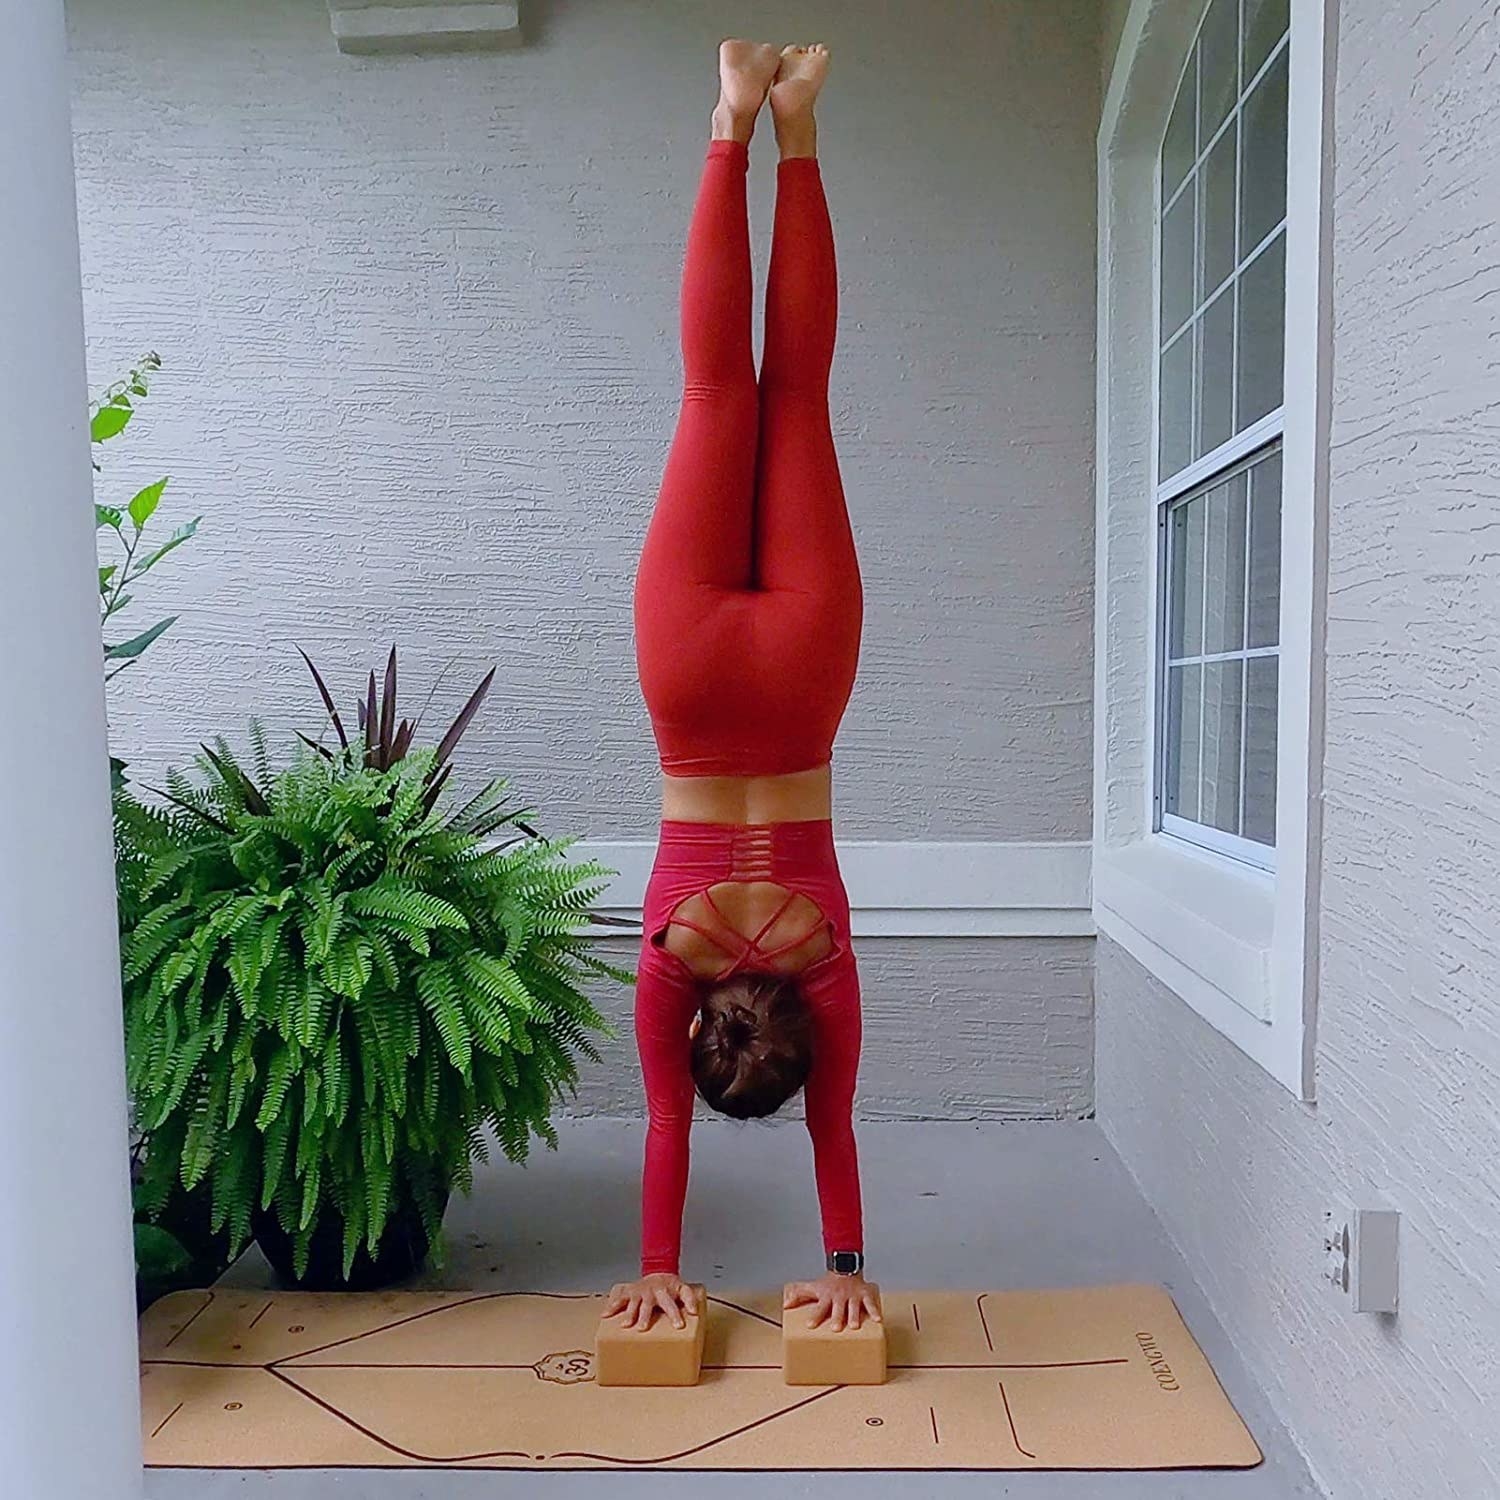 A person doing a handstand on two cork blocks